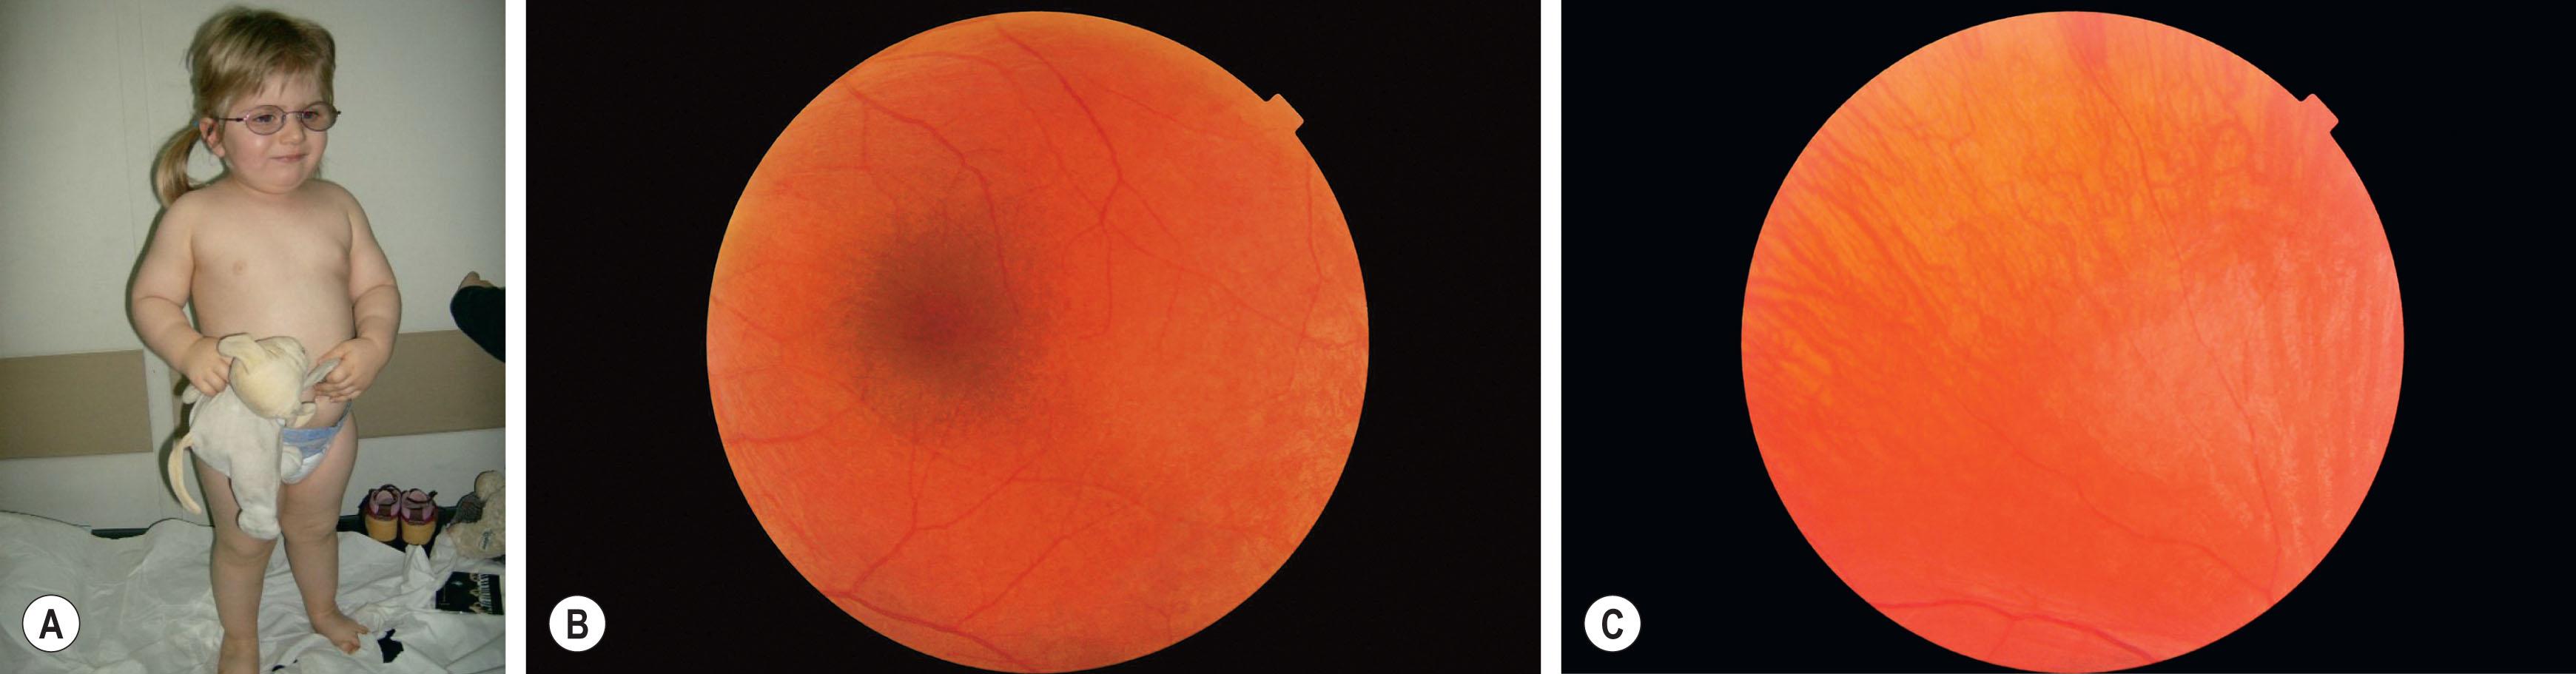 Fig. 46.4, Alström syndrome. (A) This 26-month-old girl was noted to be photophobic and overweight. She has pathogenic variants in the ALS gene. (B) Fundus photograph of the patient's macular region showing marked irregularity of the macula. Electroretinogram shows severe photopic reduction and a lesser degree of scotopic impairment. (C) Photograph of the peripheral retina; it is thinned with patchy pigmentation.